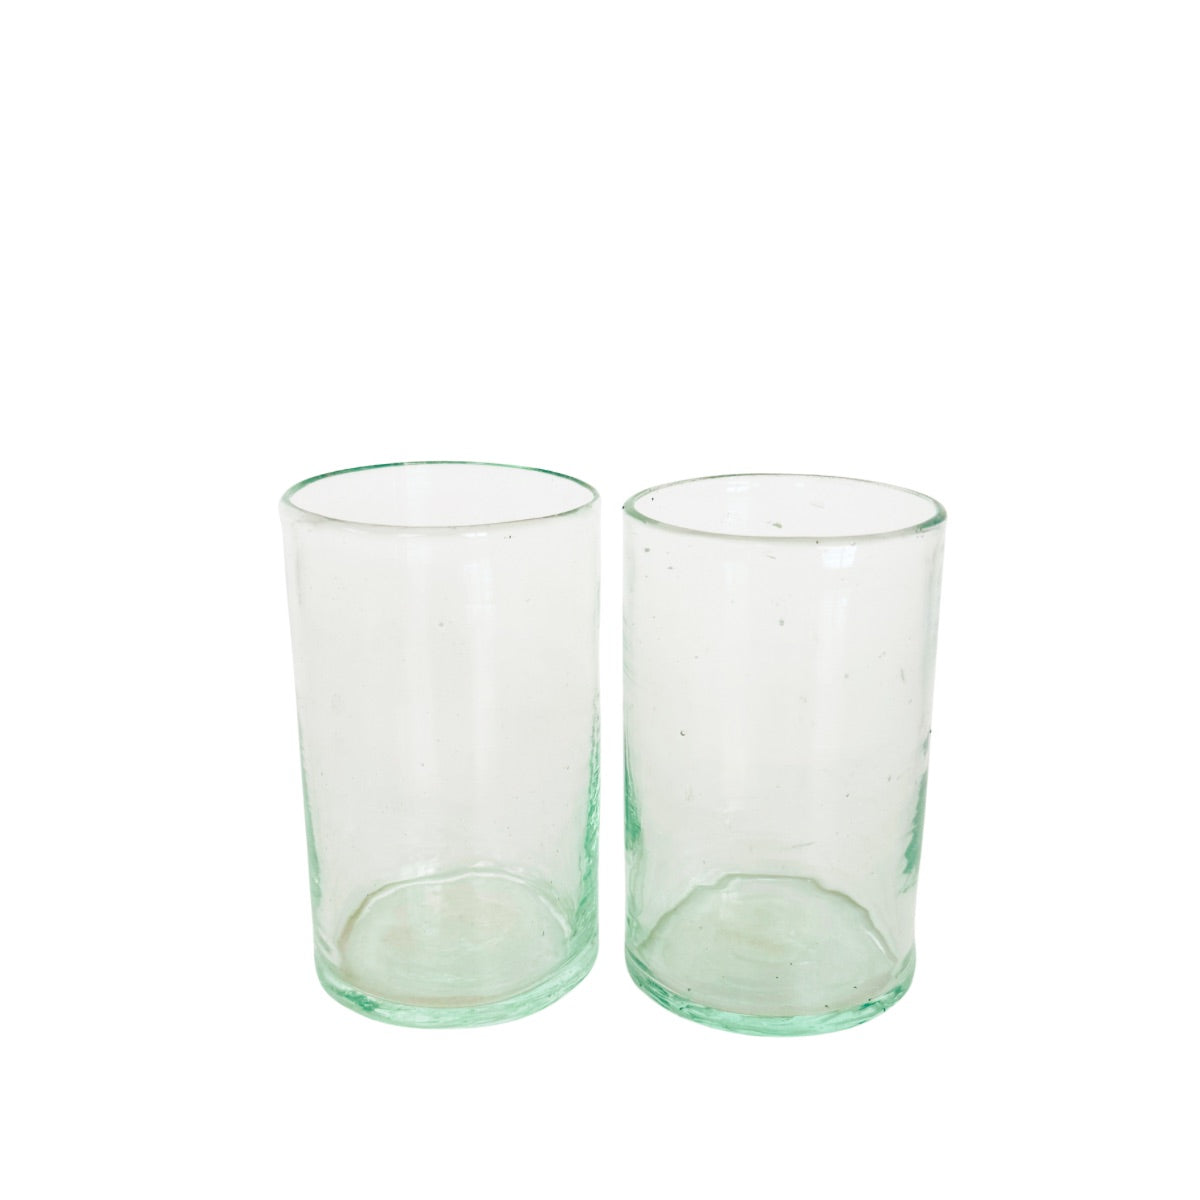 Glass Tumblers (3”), Set of Two - Sea Glass Green Tint